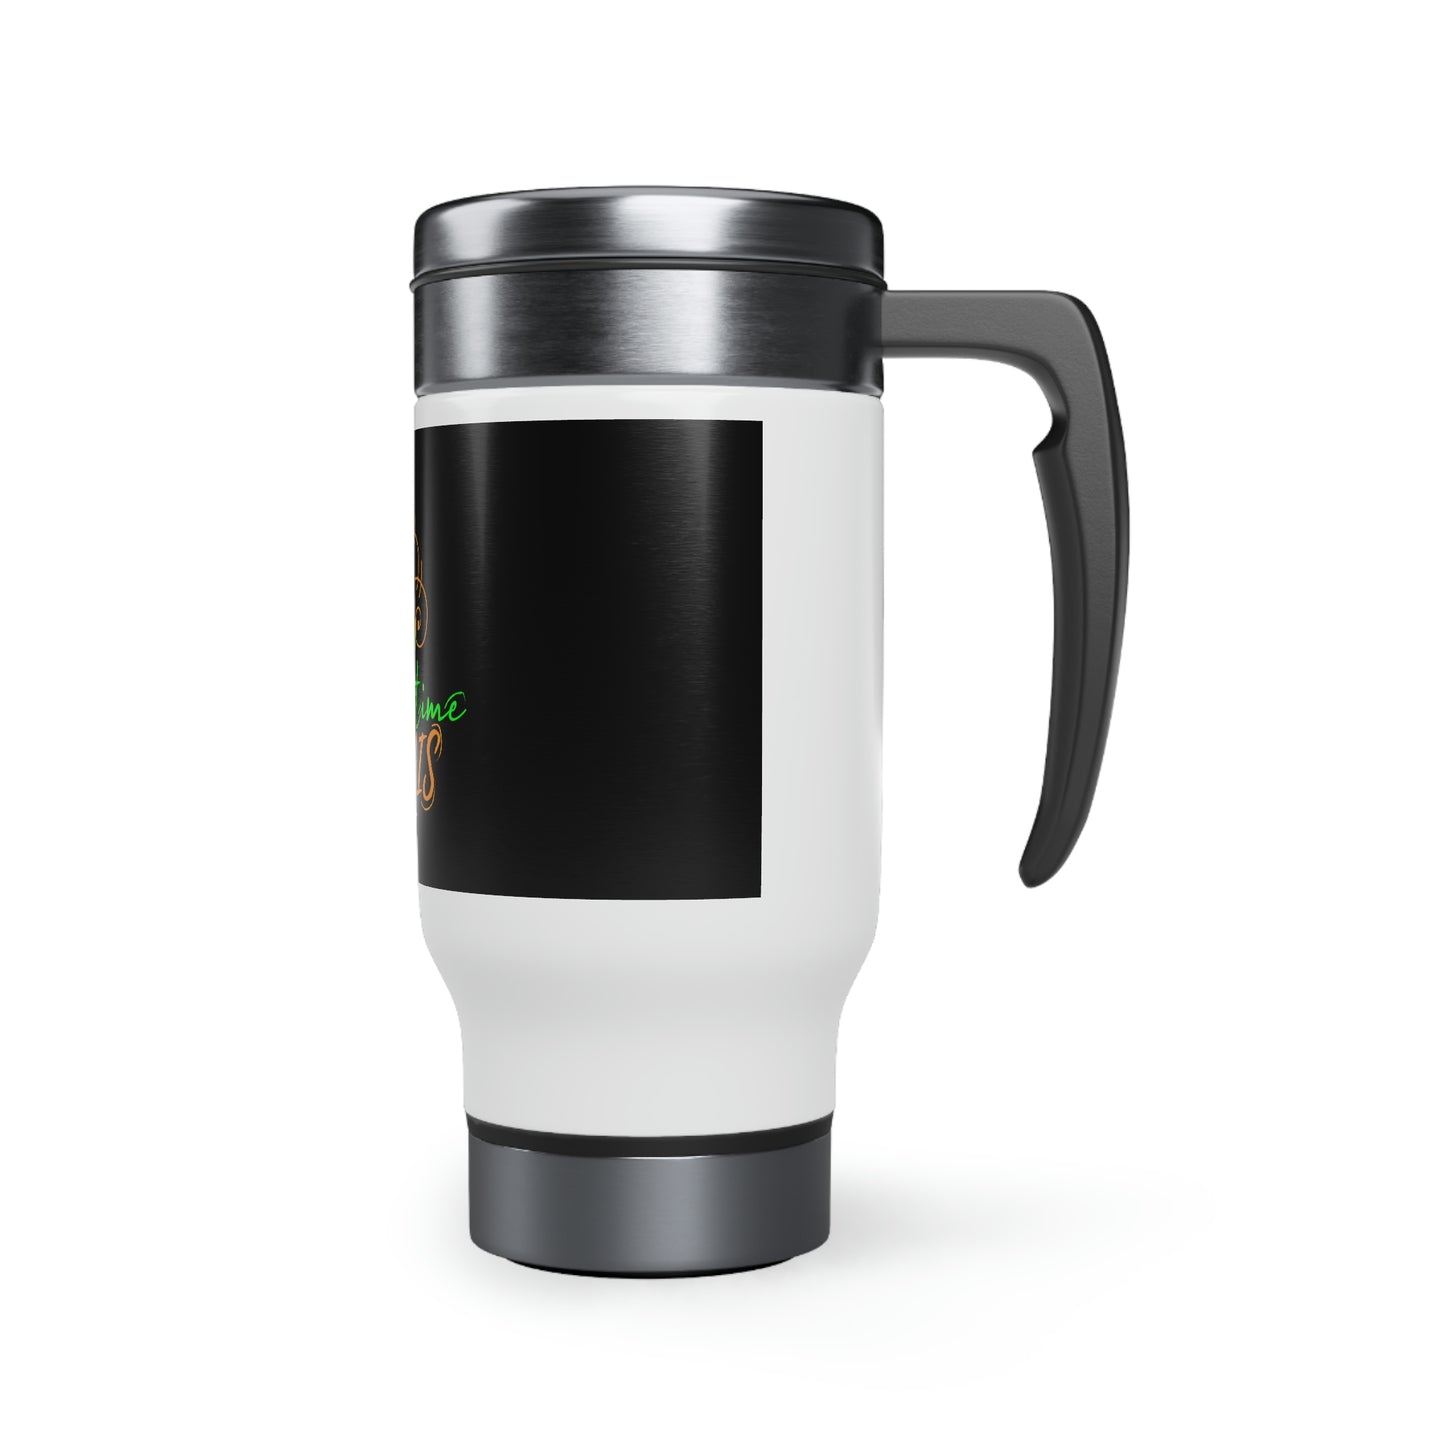 Born For Such A Time As This Travel Mug with Handle, 14oz